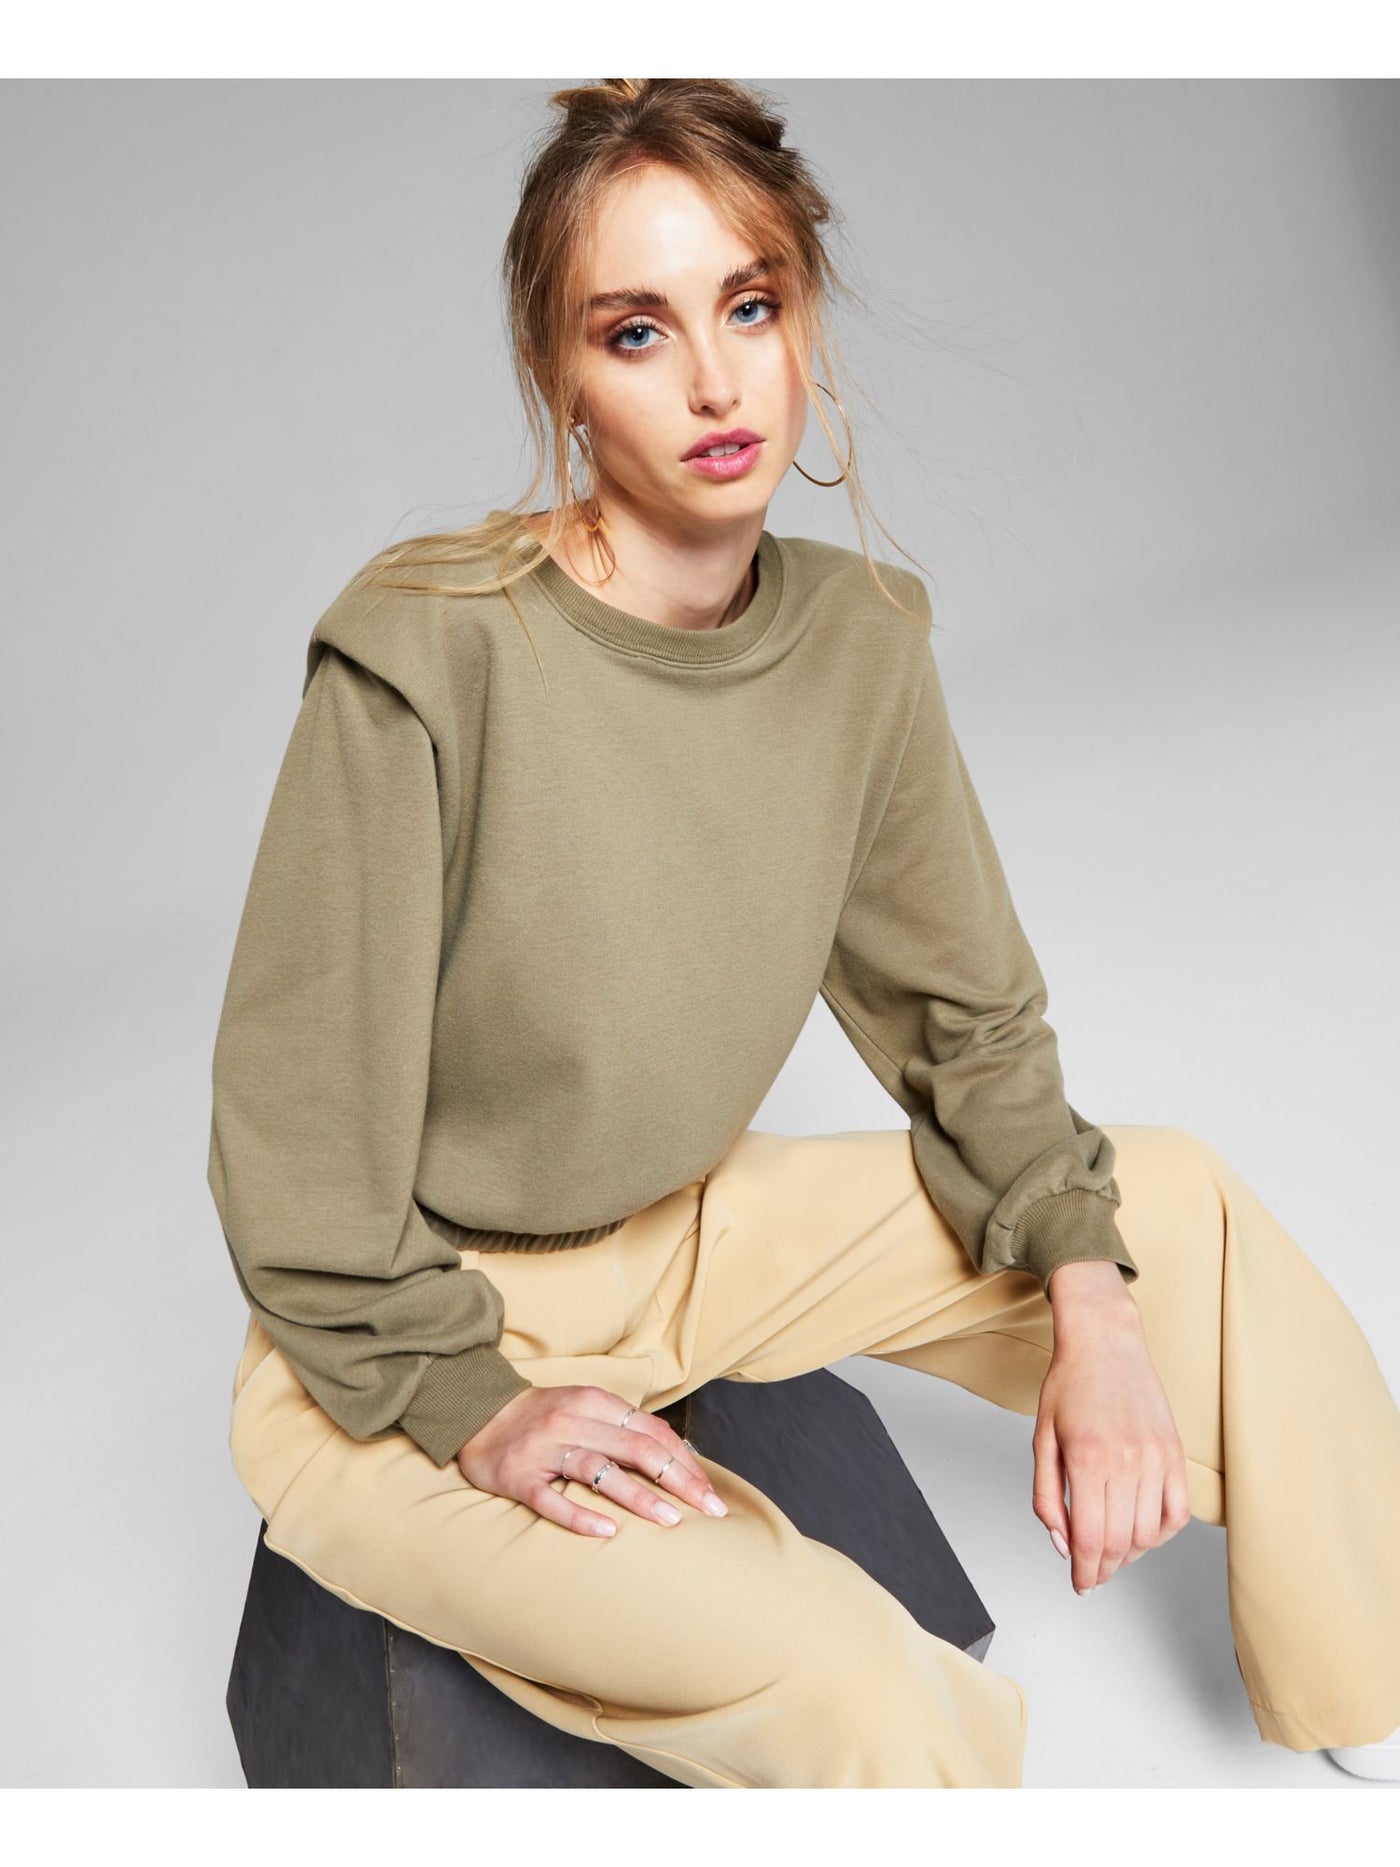 AND NOW THIS Womens Green Stretch Ribbed Elastic Waist Shoulder Pads Sweatshirt S